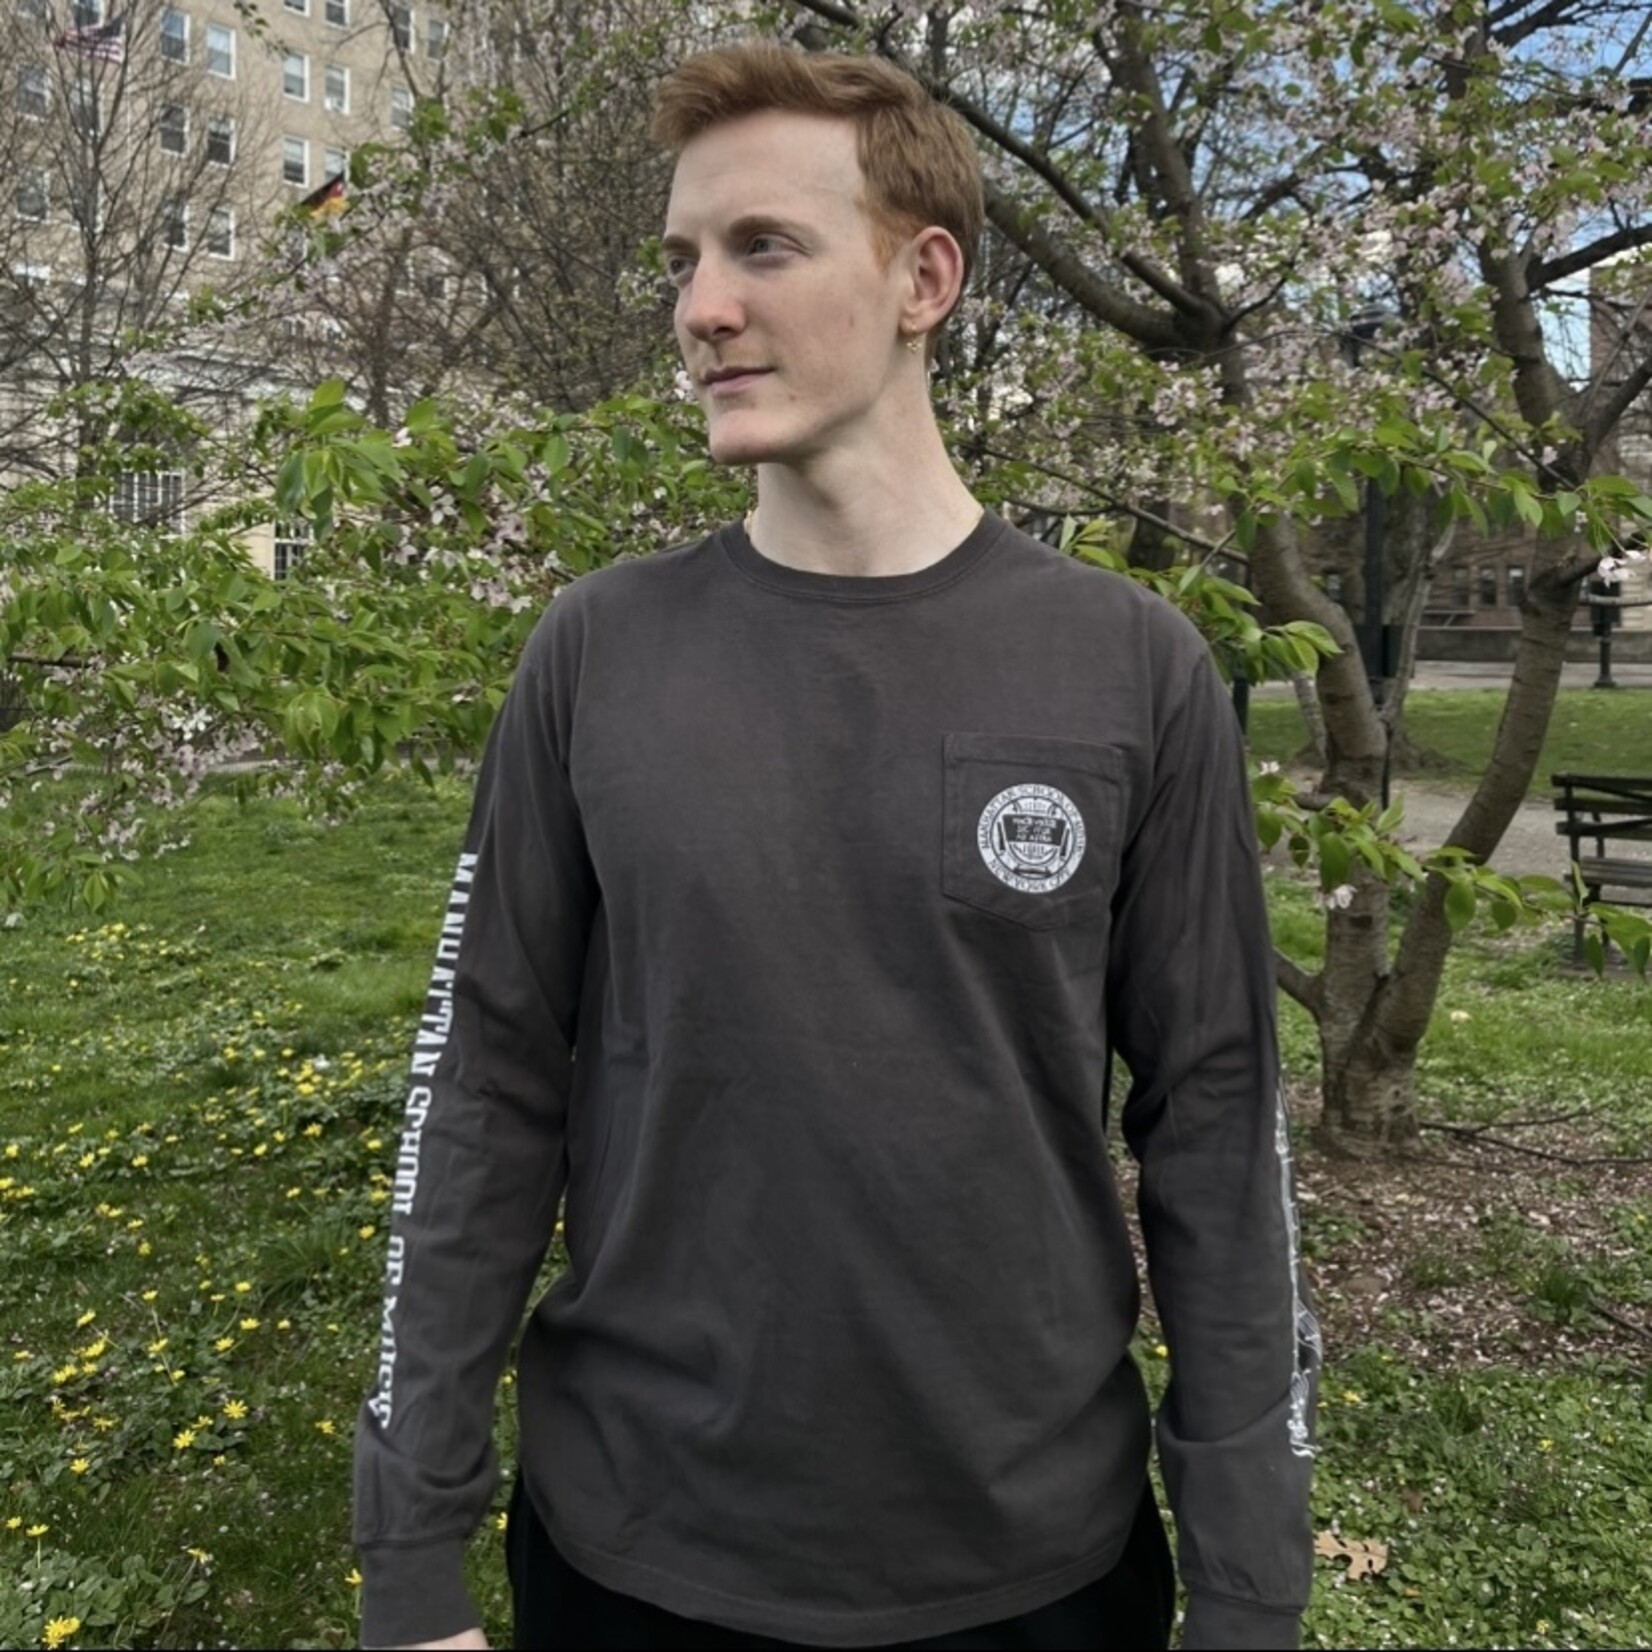 Gray Long Sleeve with Pocket and Staff